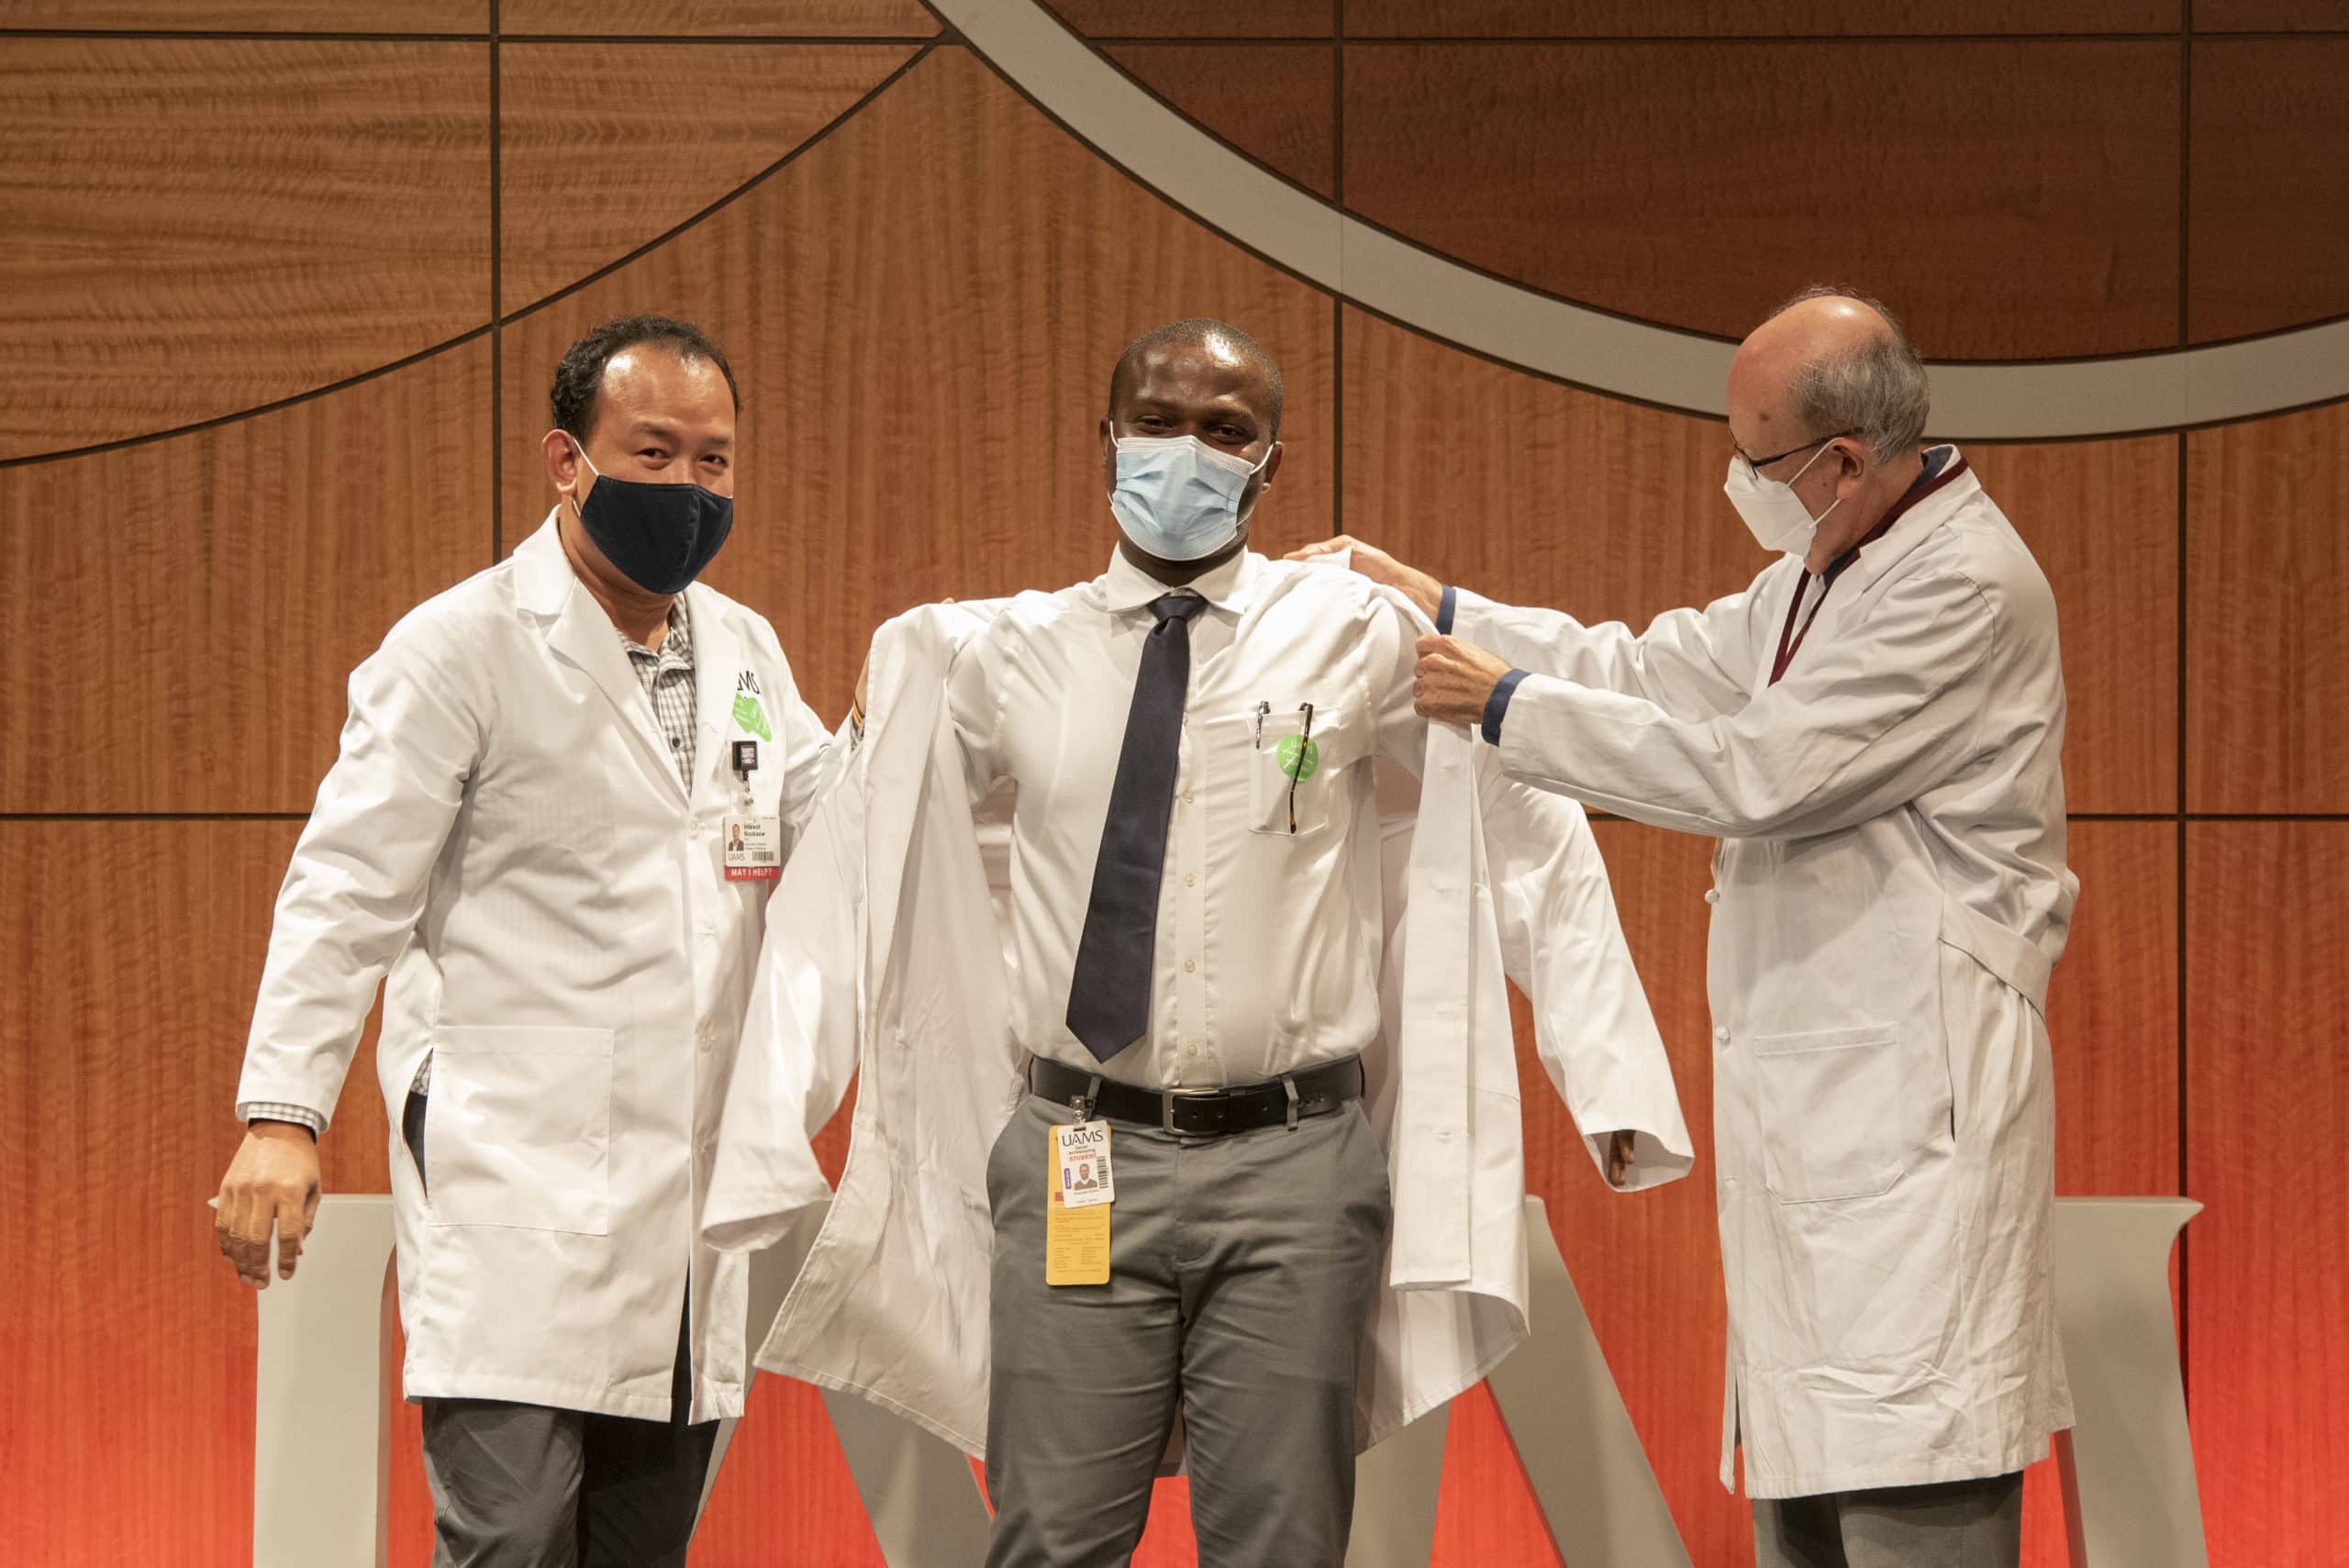 Daniel Acheampong (center) dons his white coat with assistance from Intawat Nookaew, Ph.D., and Cesar M. Compadre, Ph.D.